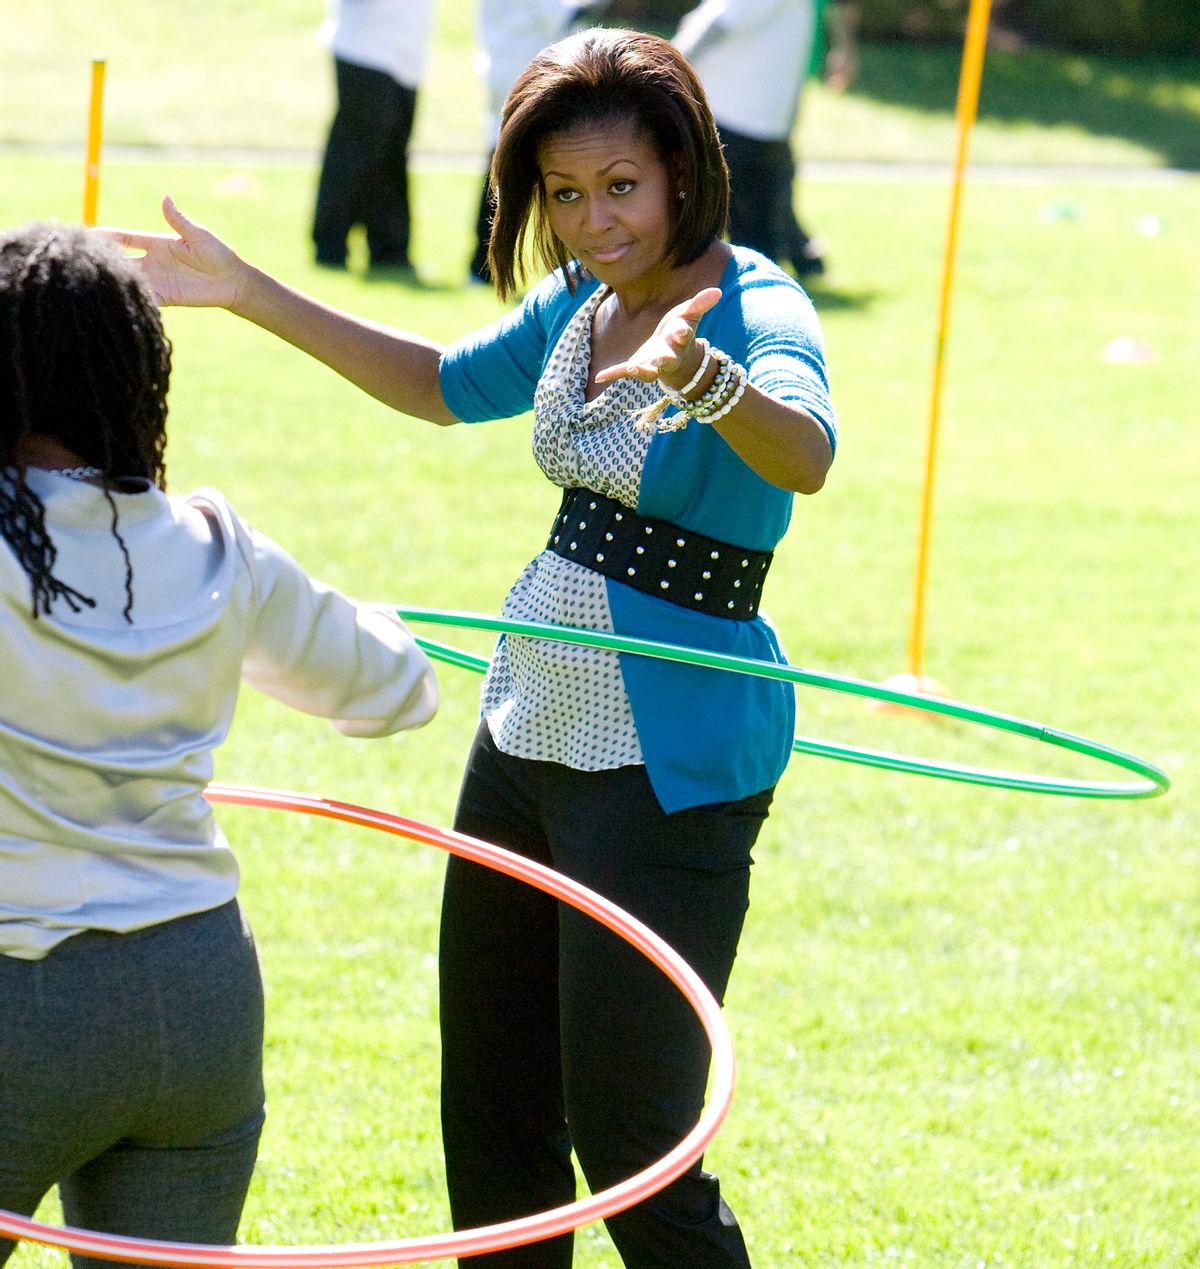 U.S. first lady Michelle Obama tries to hula hoop with children at the White House Healthy Kids Fair on the South Lawn in Washington, October 21, 2009.  REUTERS/Larry Downing (UNITED STATES POLITICS) (Reuters)